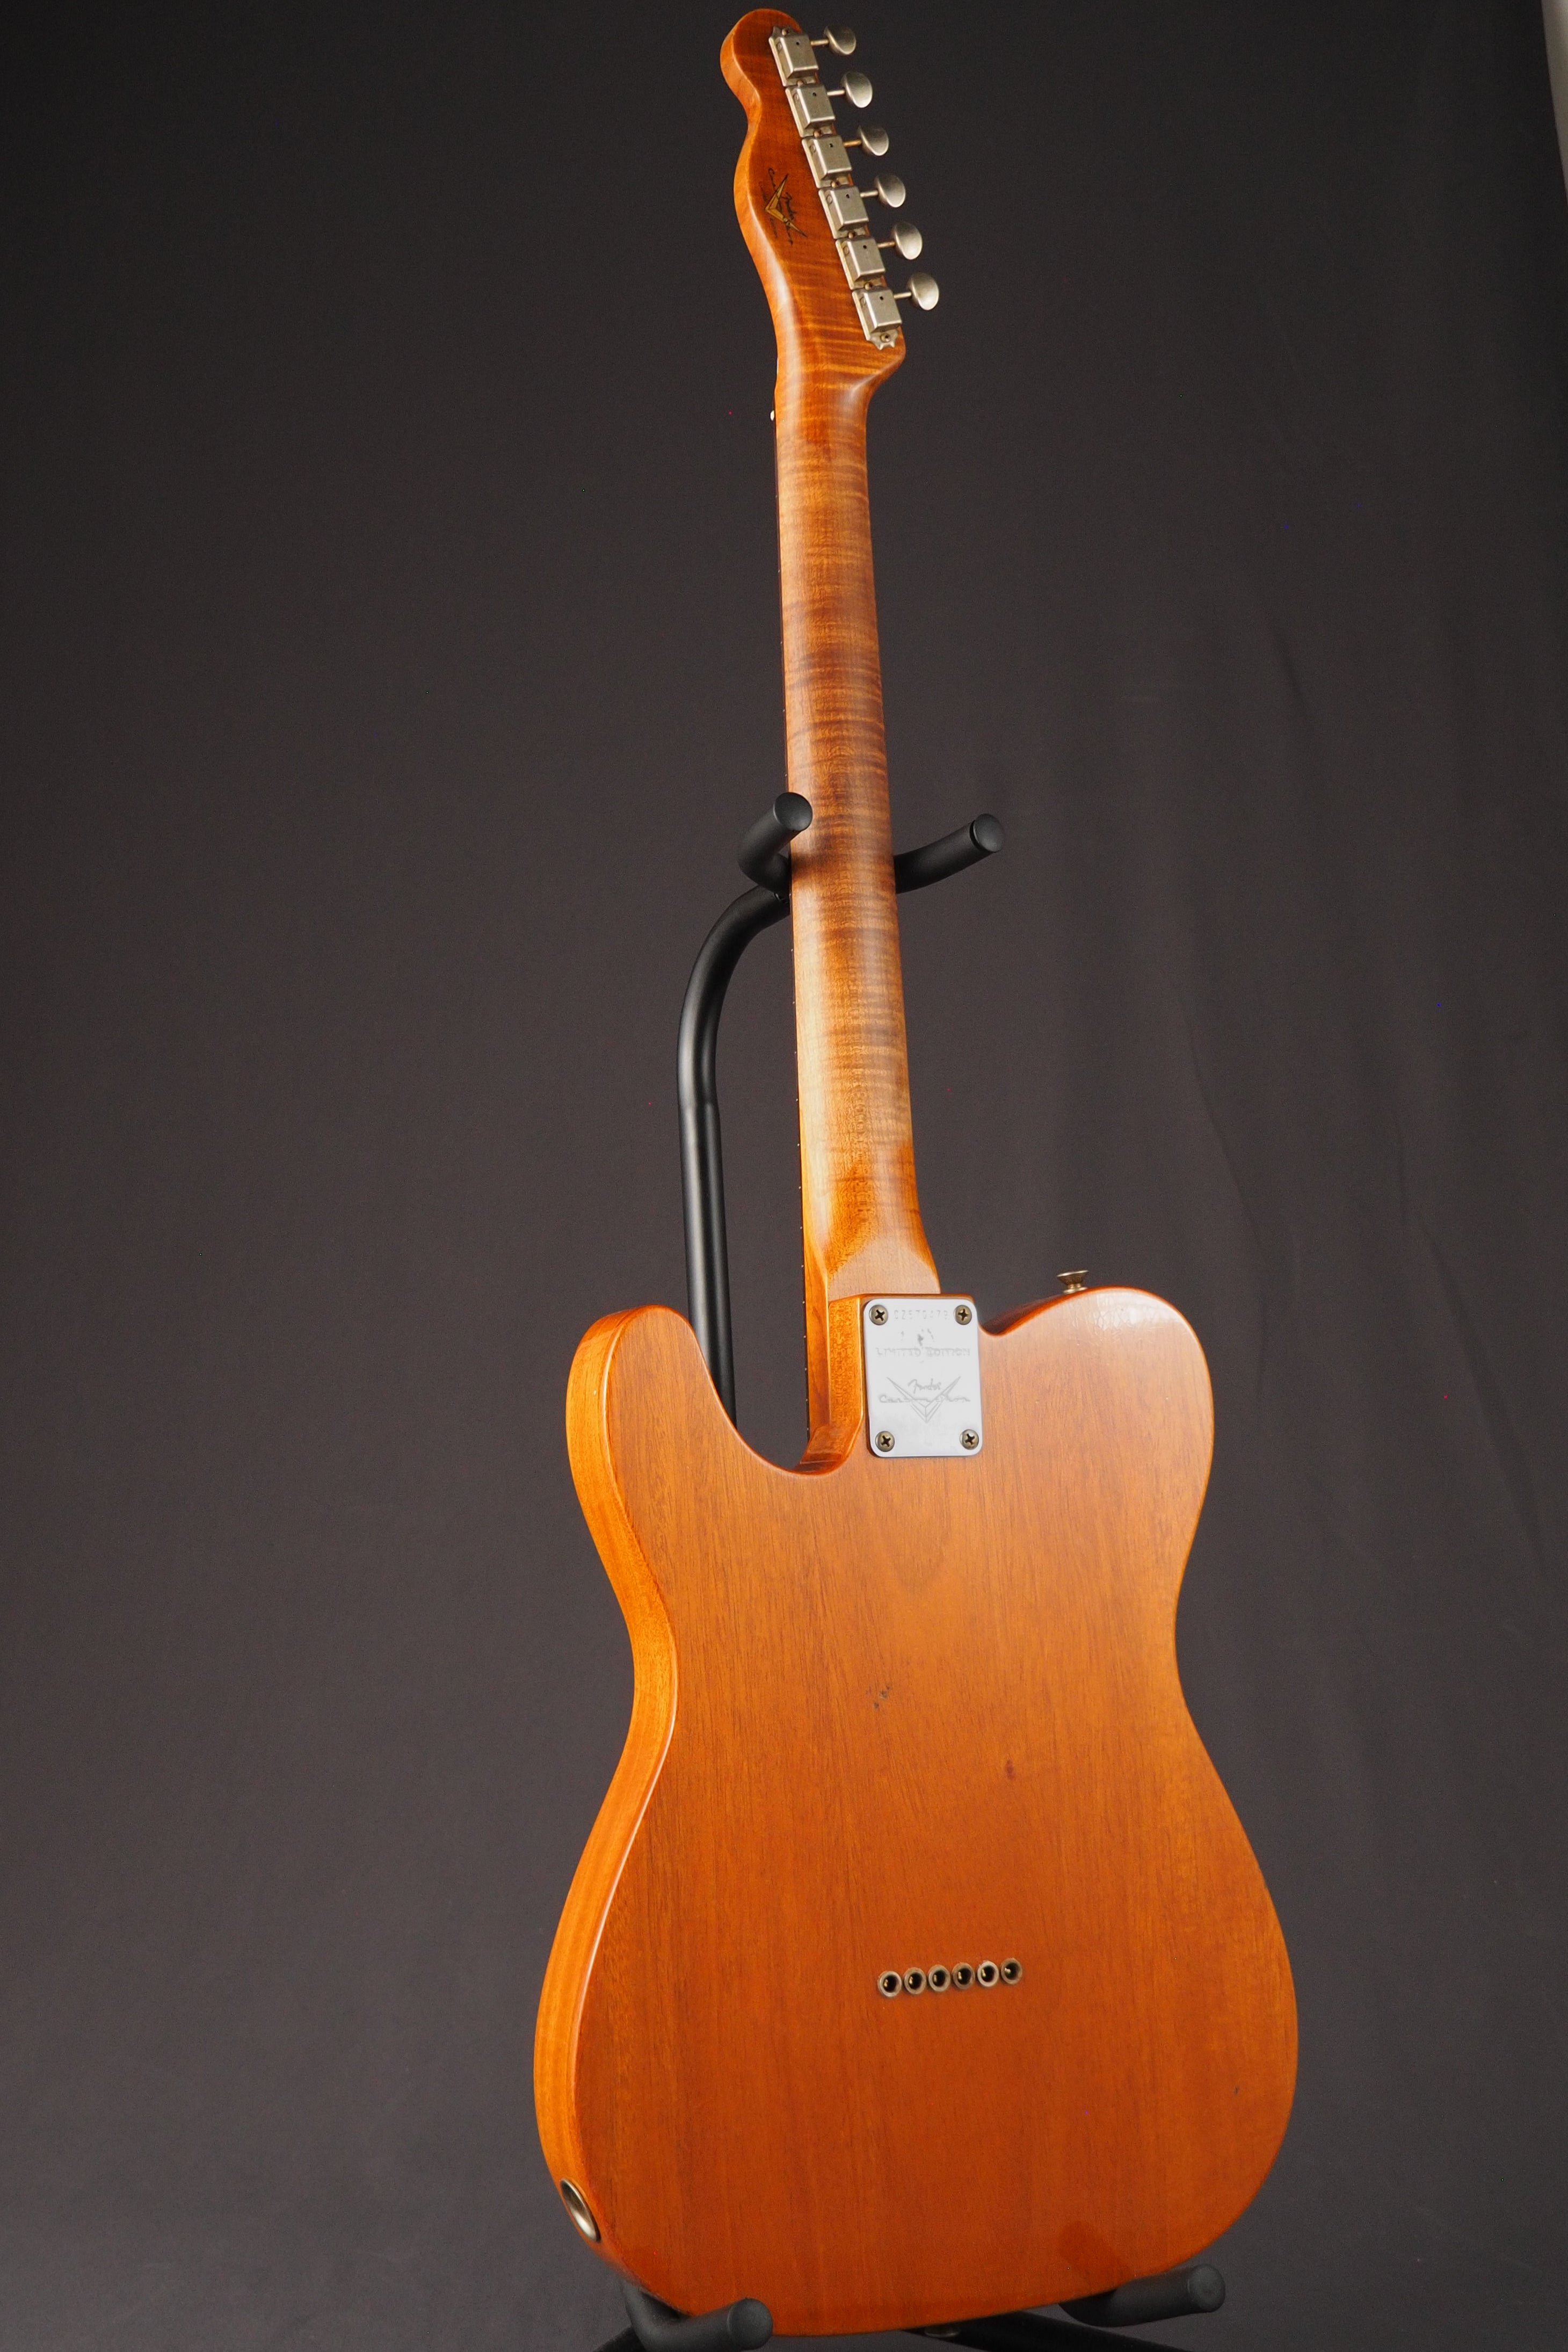 Limited Edition Dual P90 Telecaster Journeyman - Natural